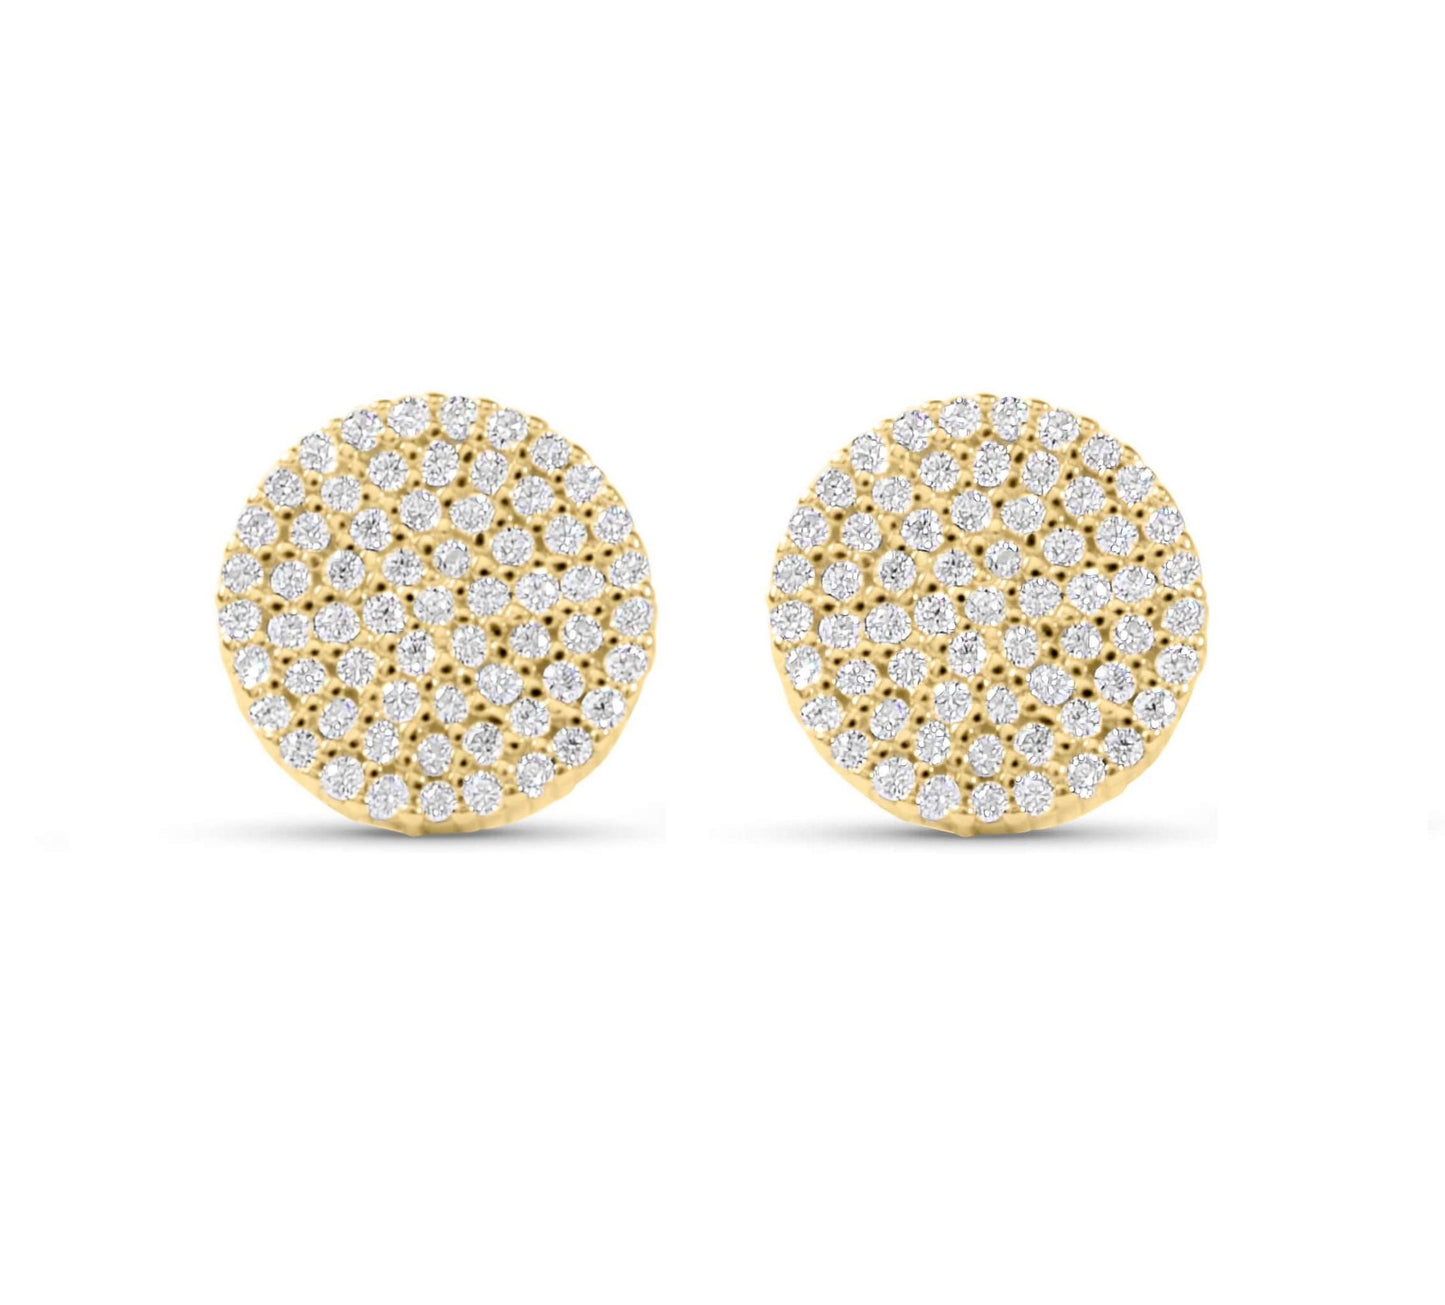 Amaral Pave Stud Moissanite Gold Earrings on white background